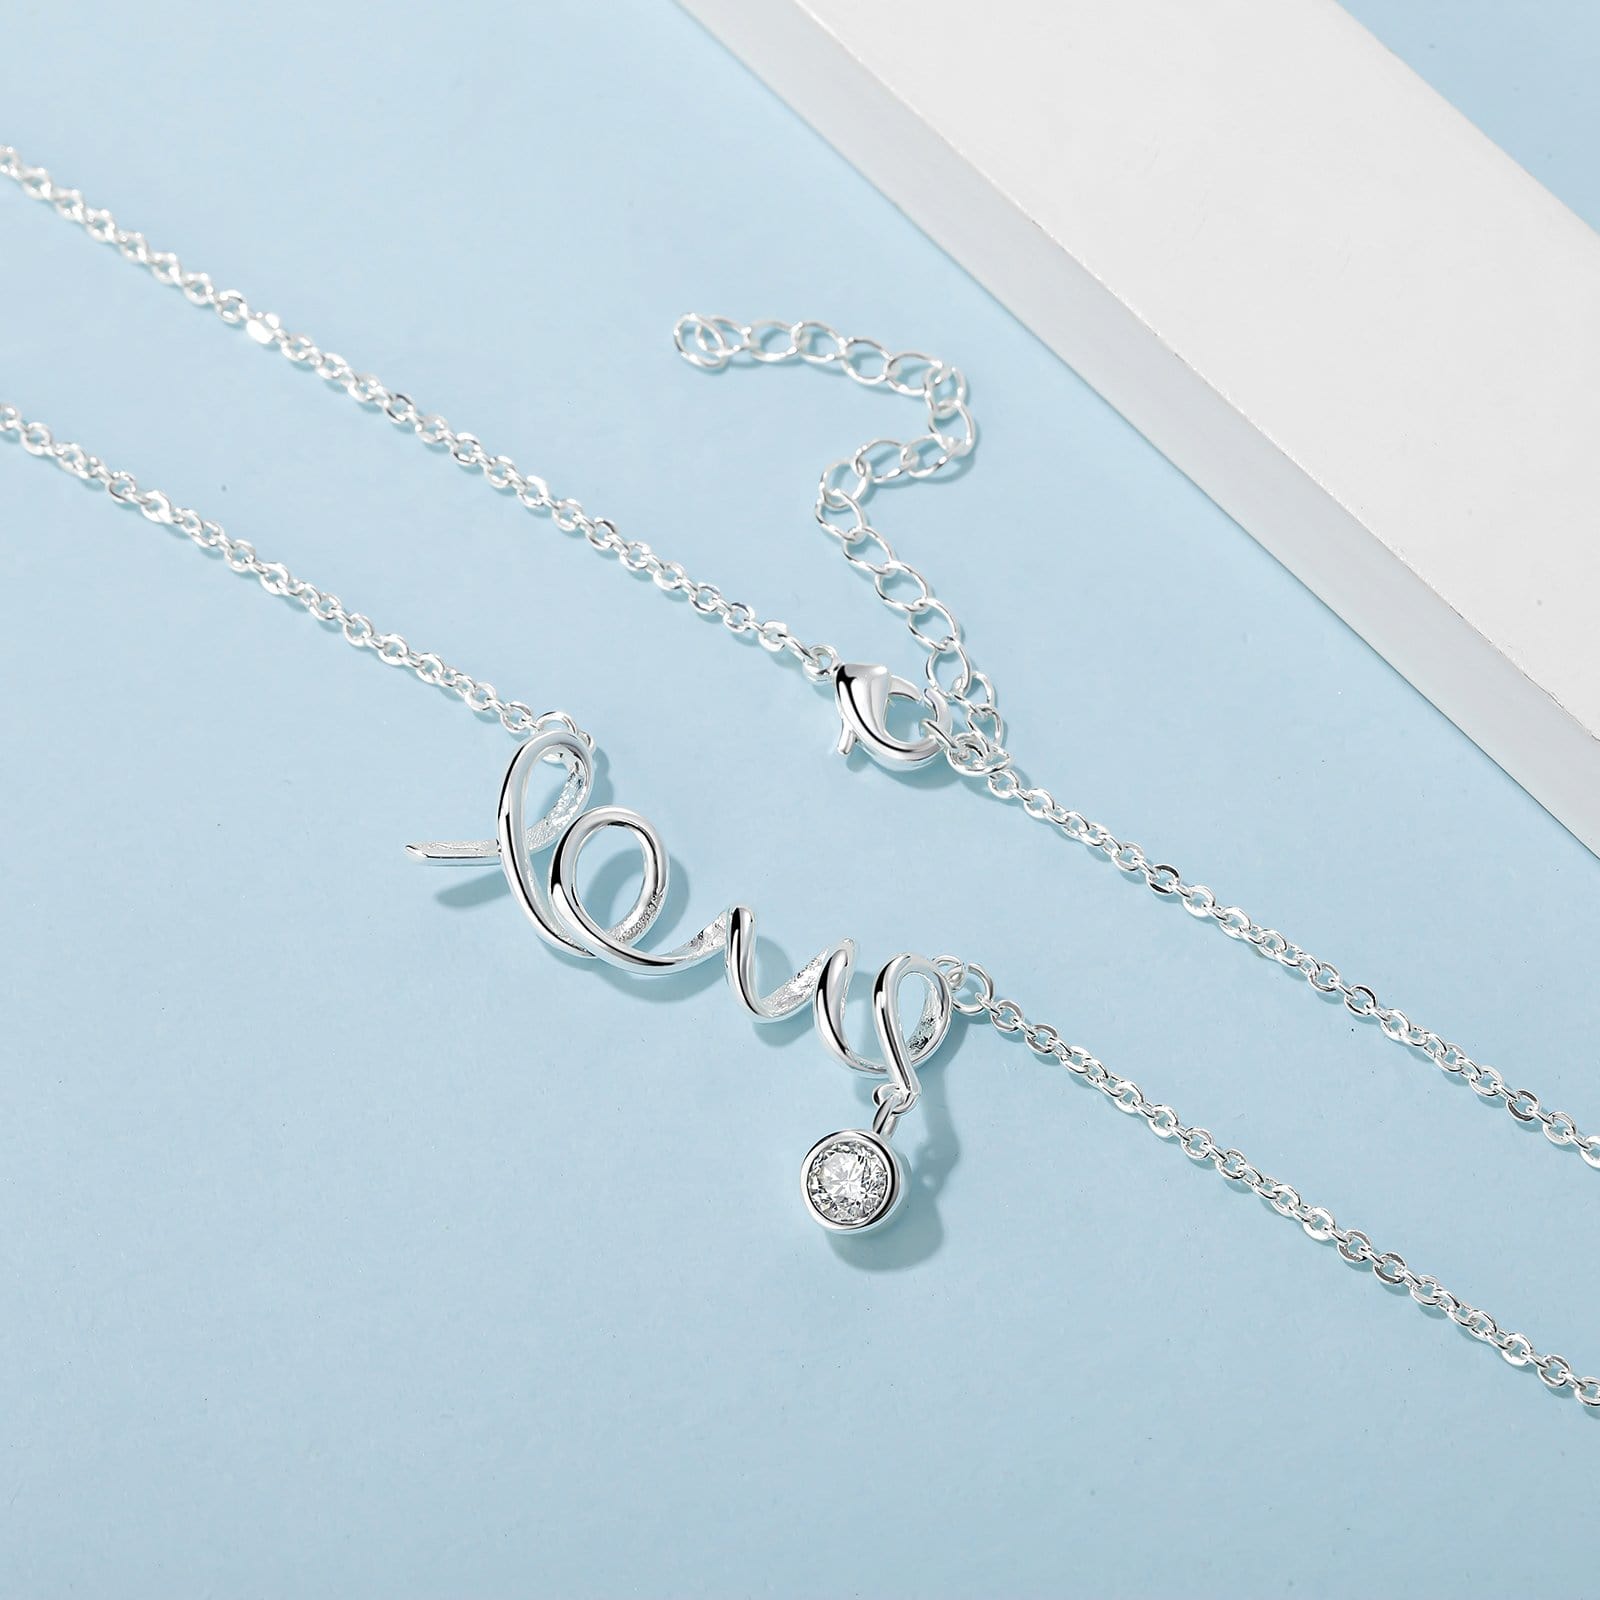 Necklaces To My Wife - I Love You Always Love Pendant Necklace GiveMe-Gifts